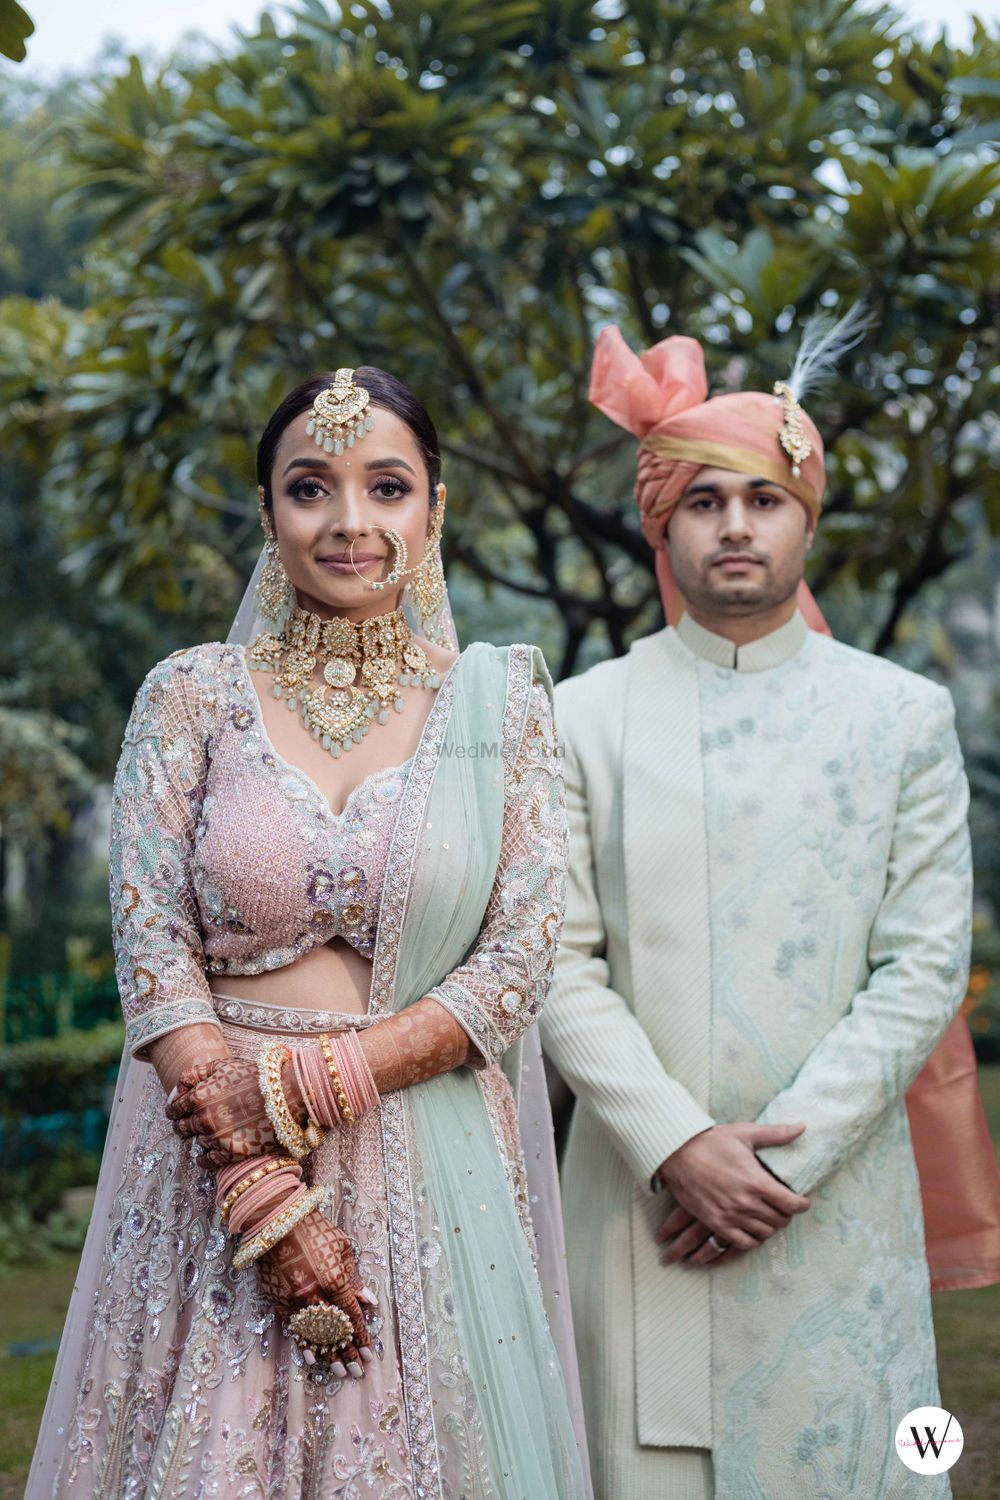 Photo of pastel bride and groom in contrasting outfits modern wedding look